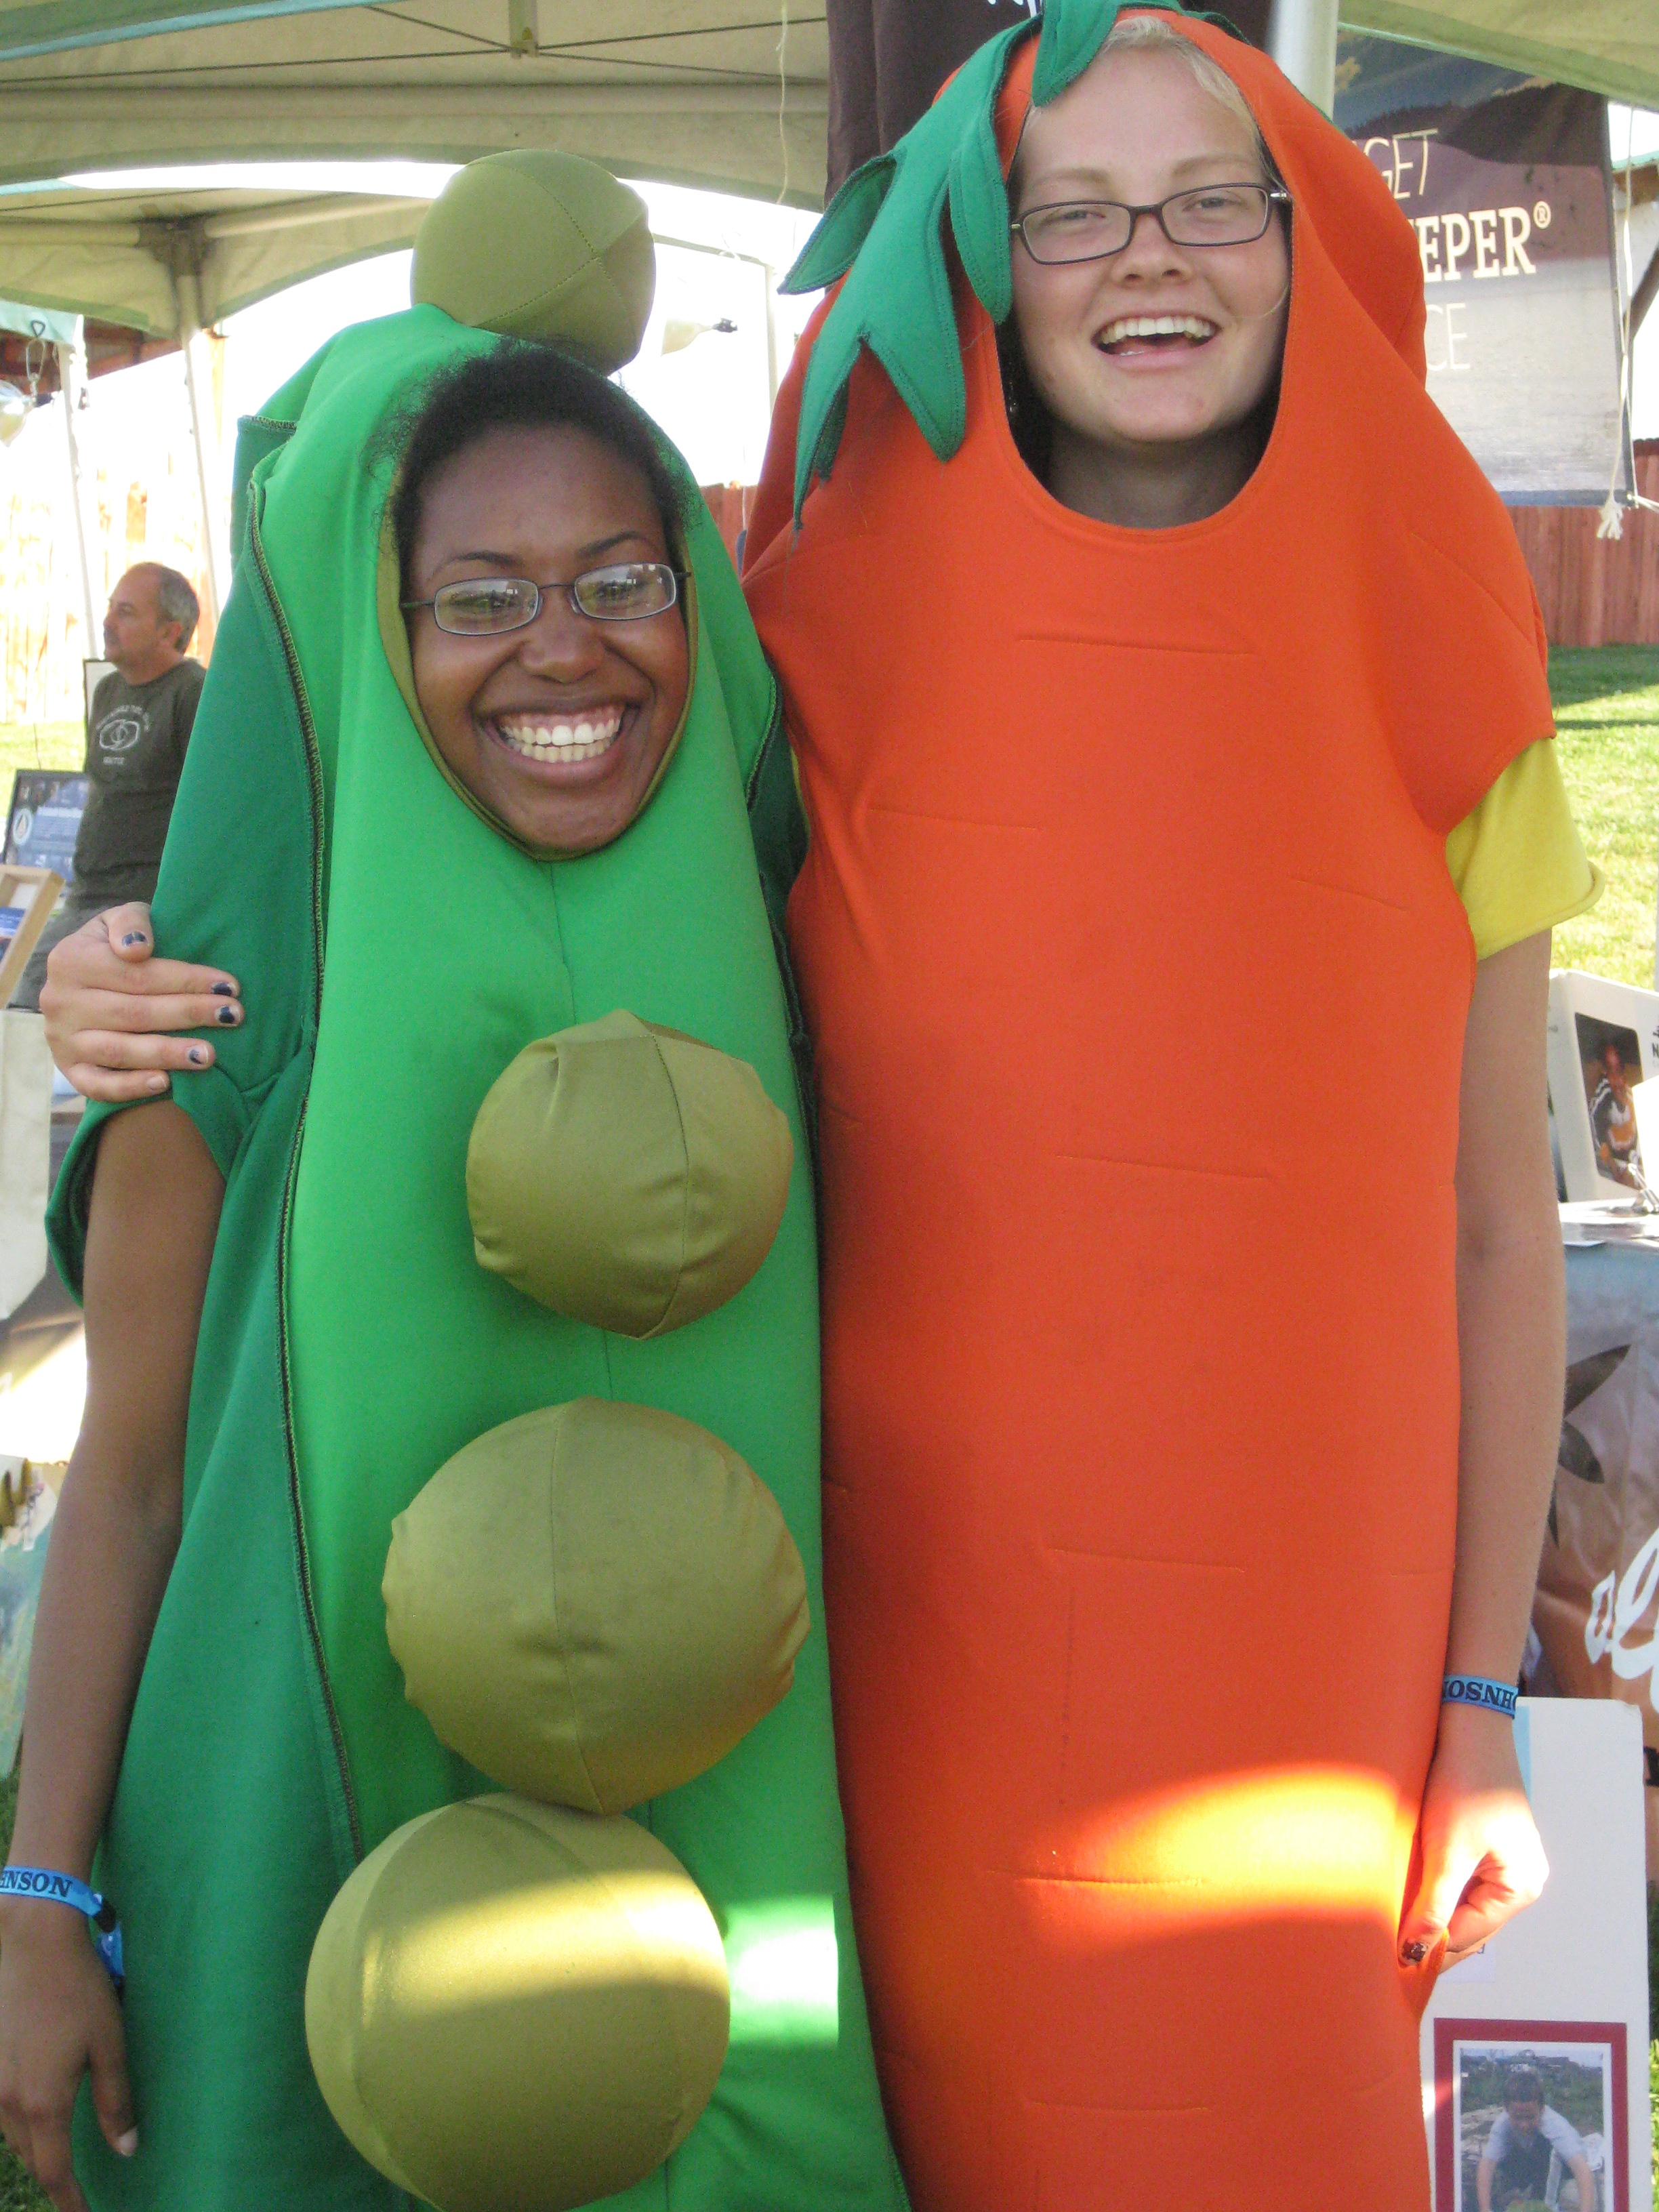 Meredith and Amelia wearing pea and carrot costumes!